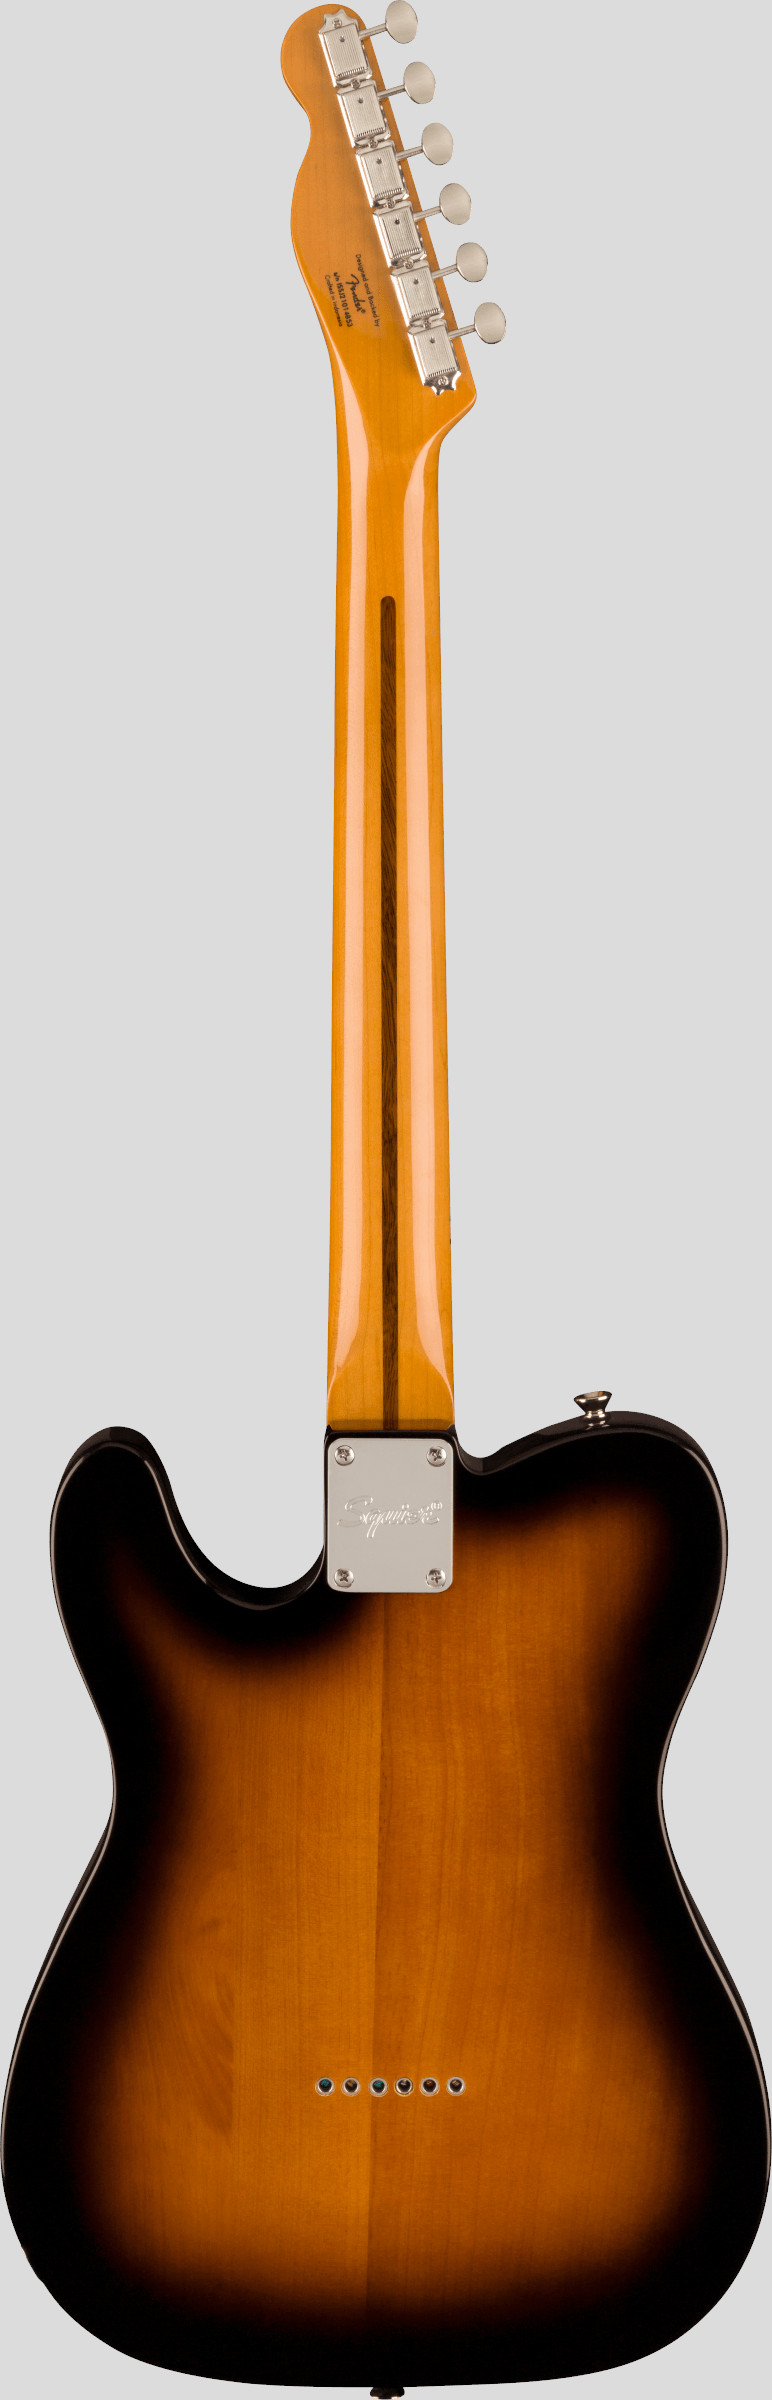 Squier by Fender Limited Edition Classic Vibe 50 Telecaster 2-Color Sunburst 2